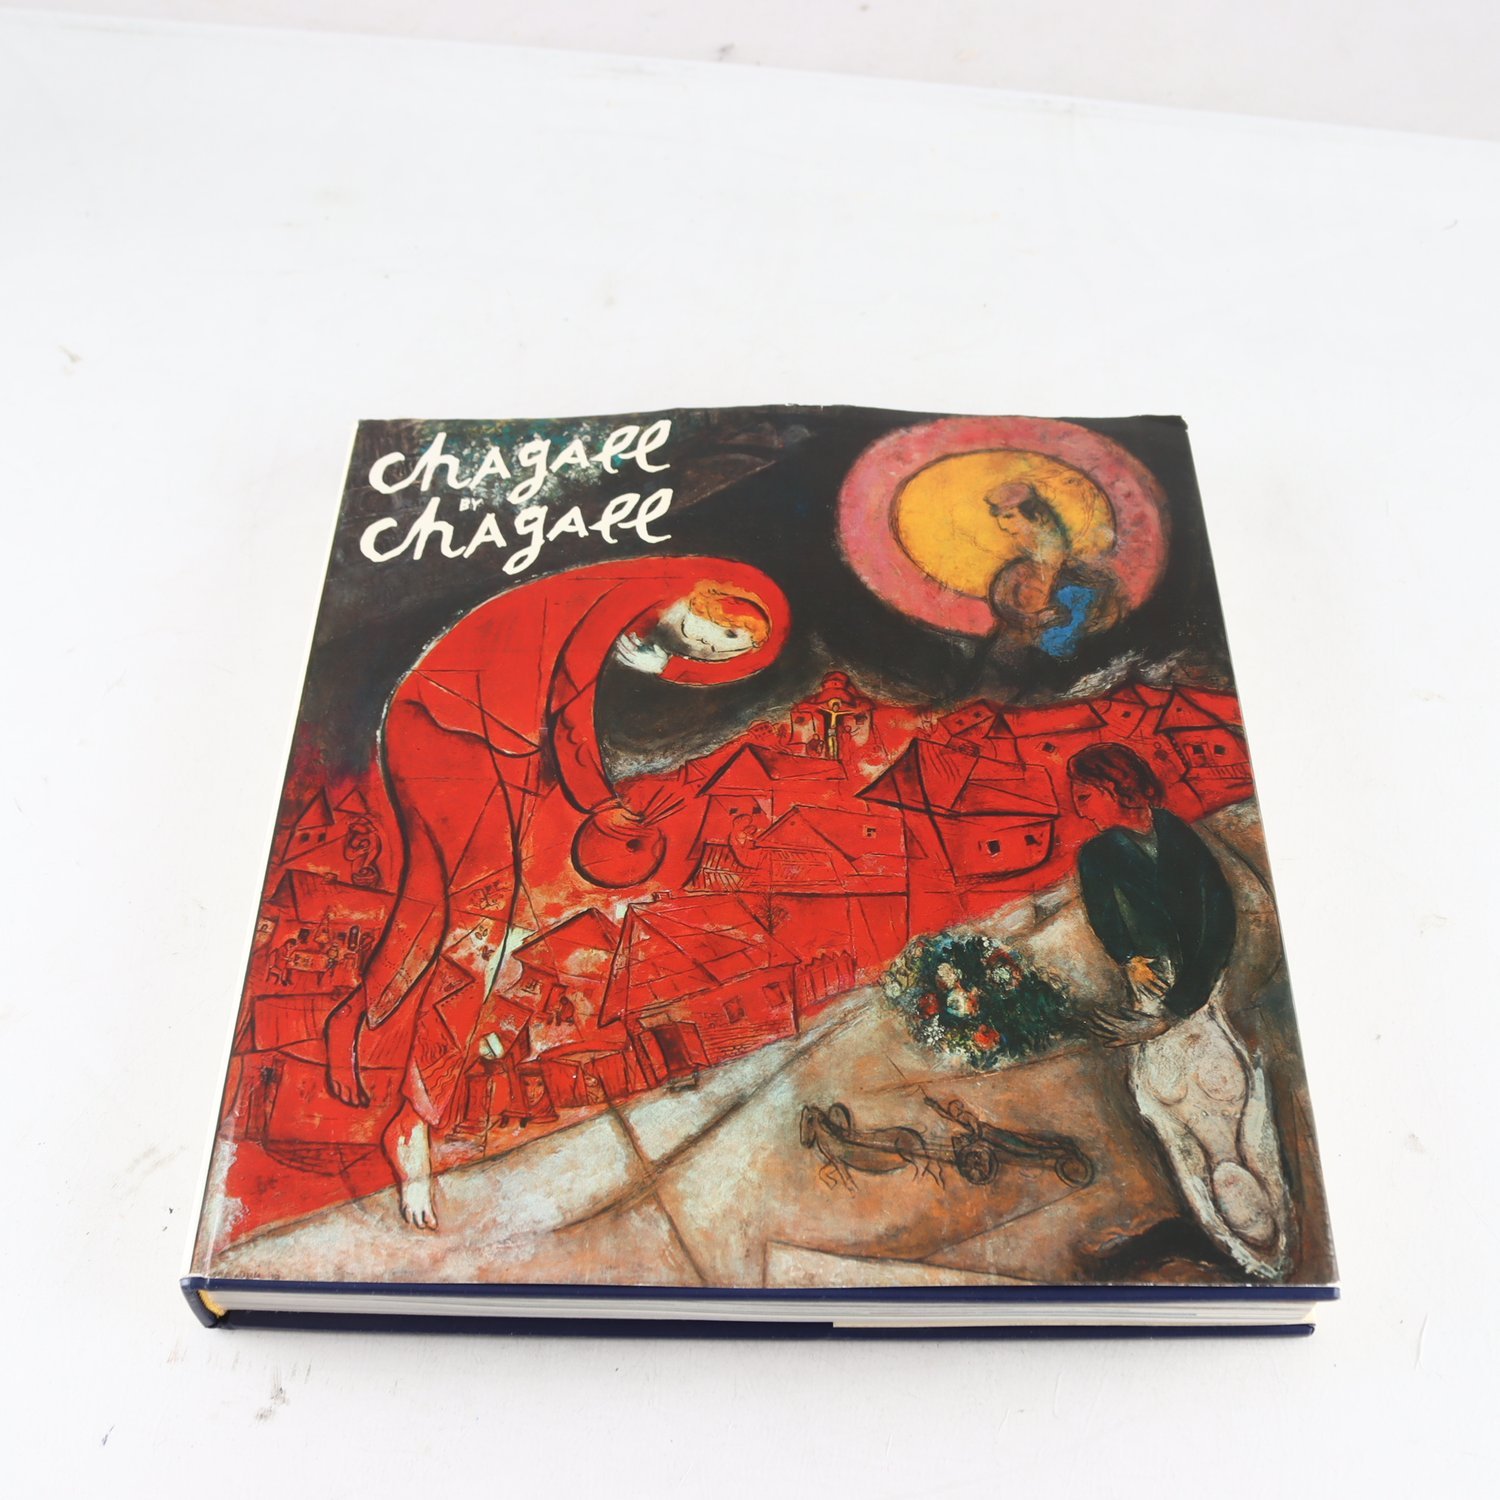 Chagall by Chagall, Edited by Charles Sorlier